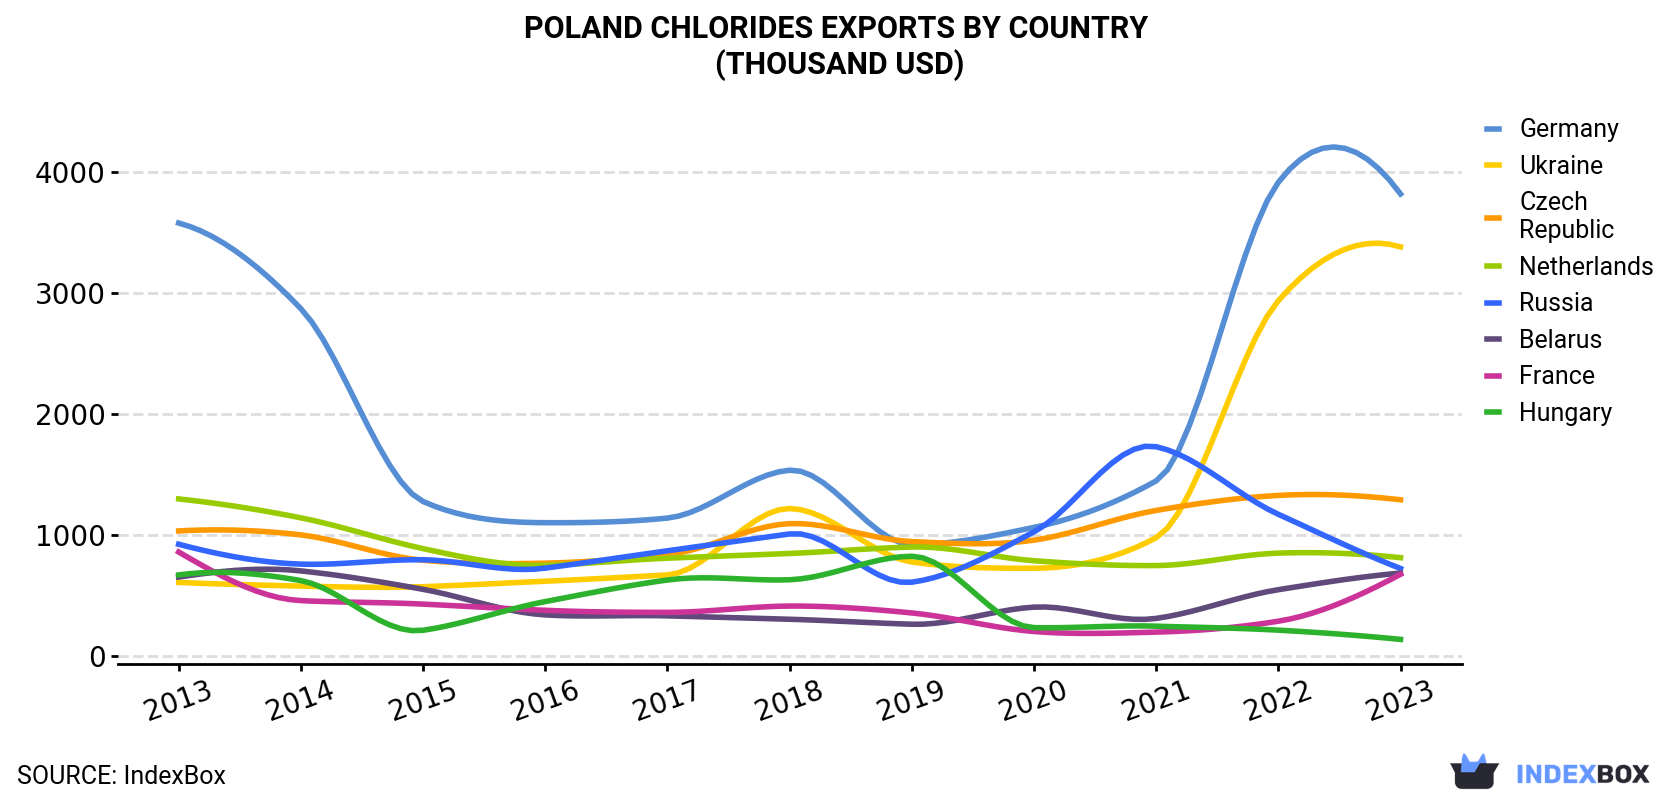 Poland Chlorides Exports By Country (Thousand USD)